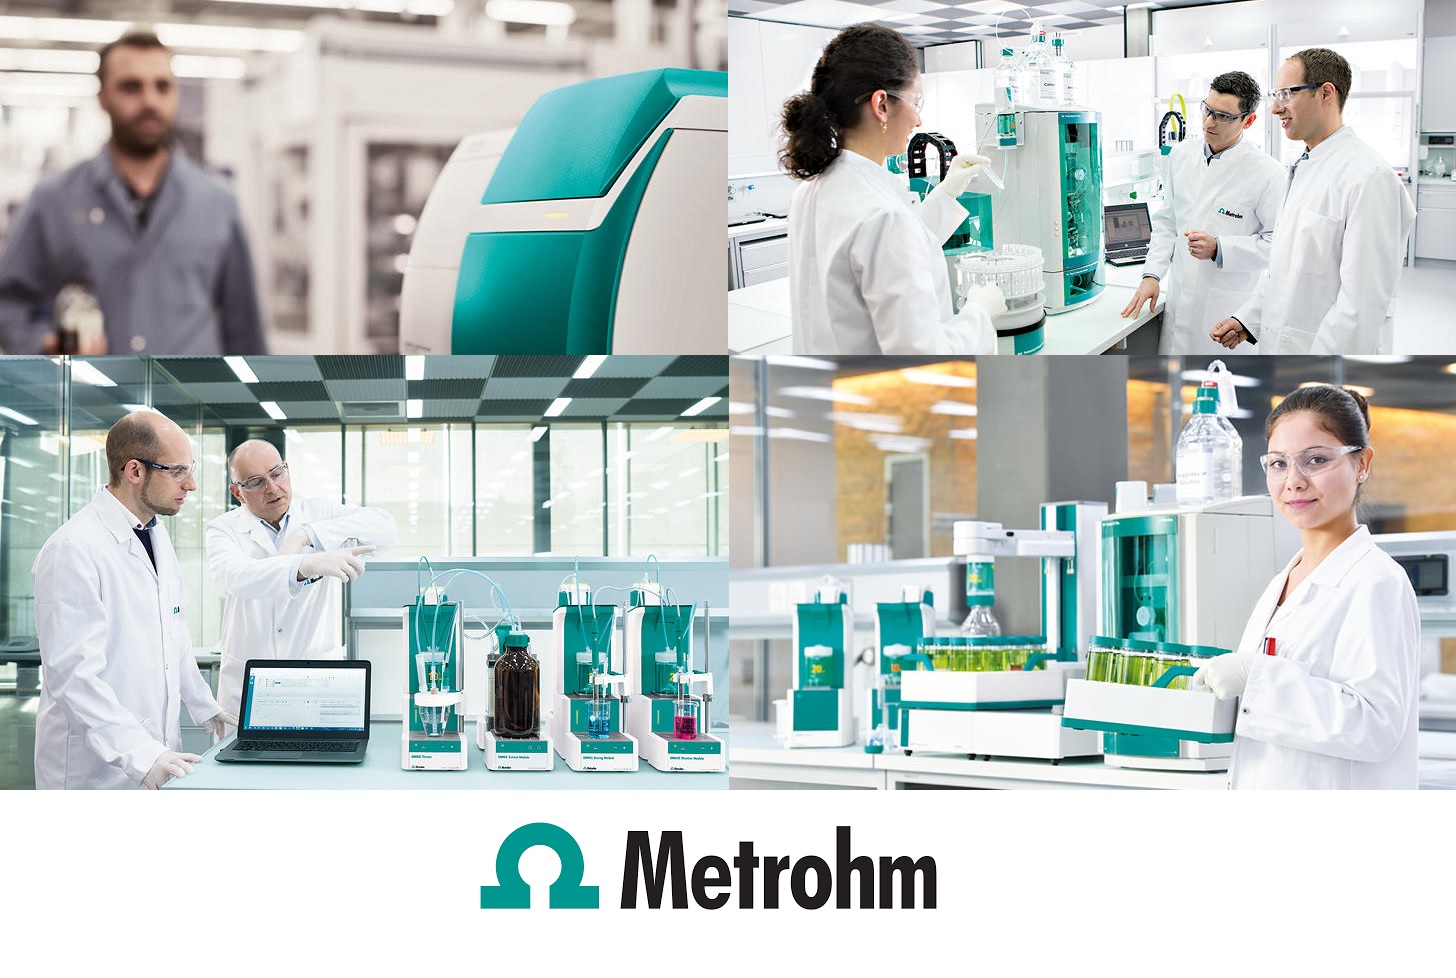 Metrohm: Karl Fischer Titration on a Whole New Level with OMNIS